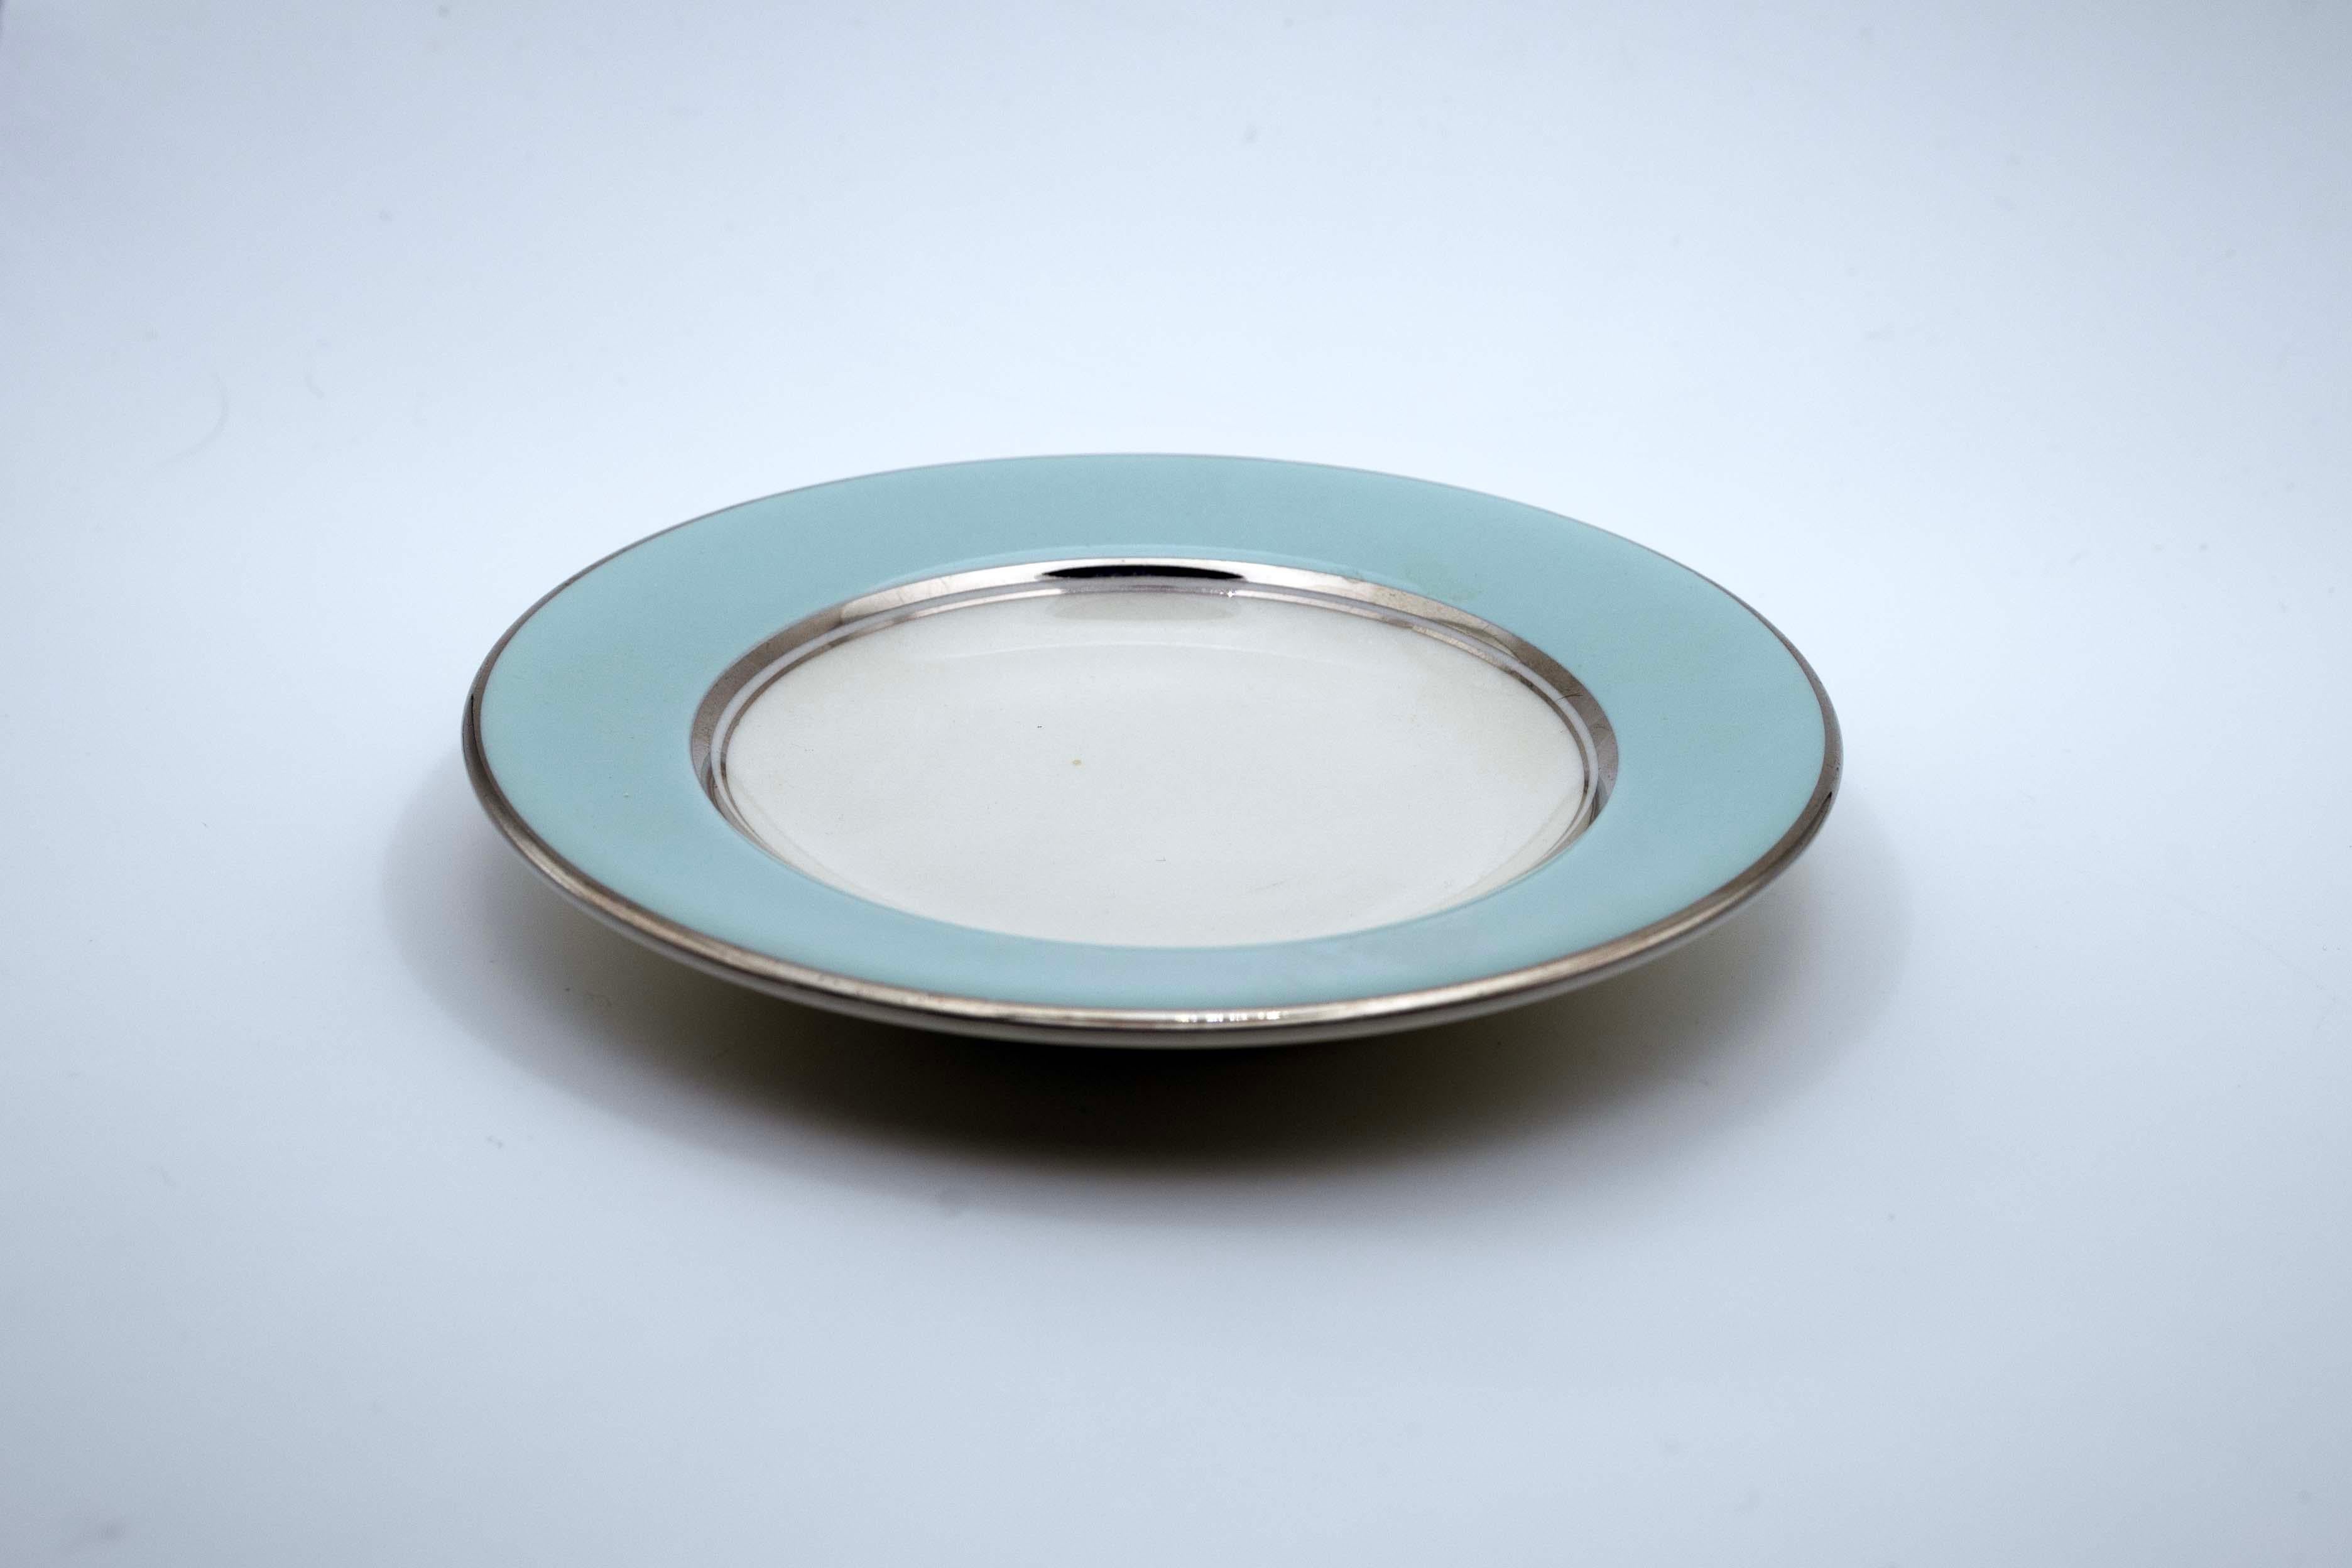 Castleton Turquoise and Platnium Rim Set of 114 Dishware Circa 1954-1972 In Good Condition For Sale In Keego Harbor, MI